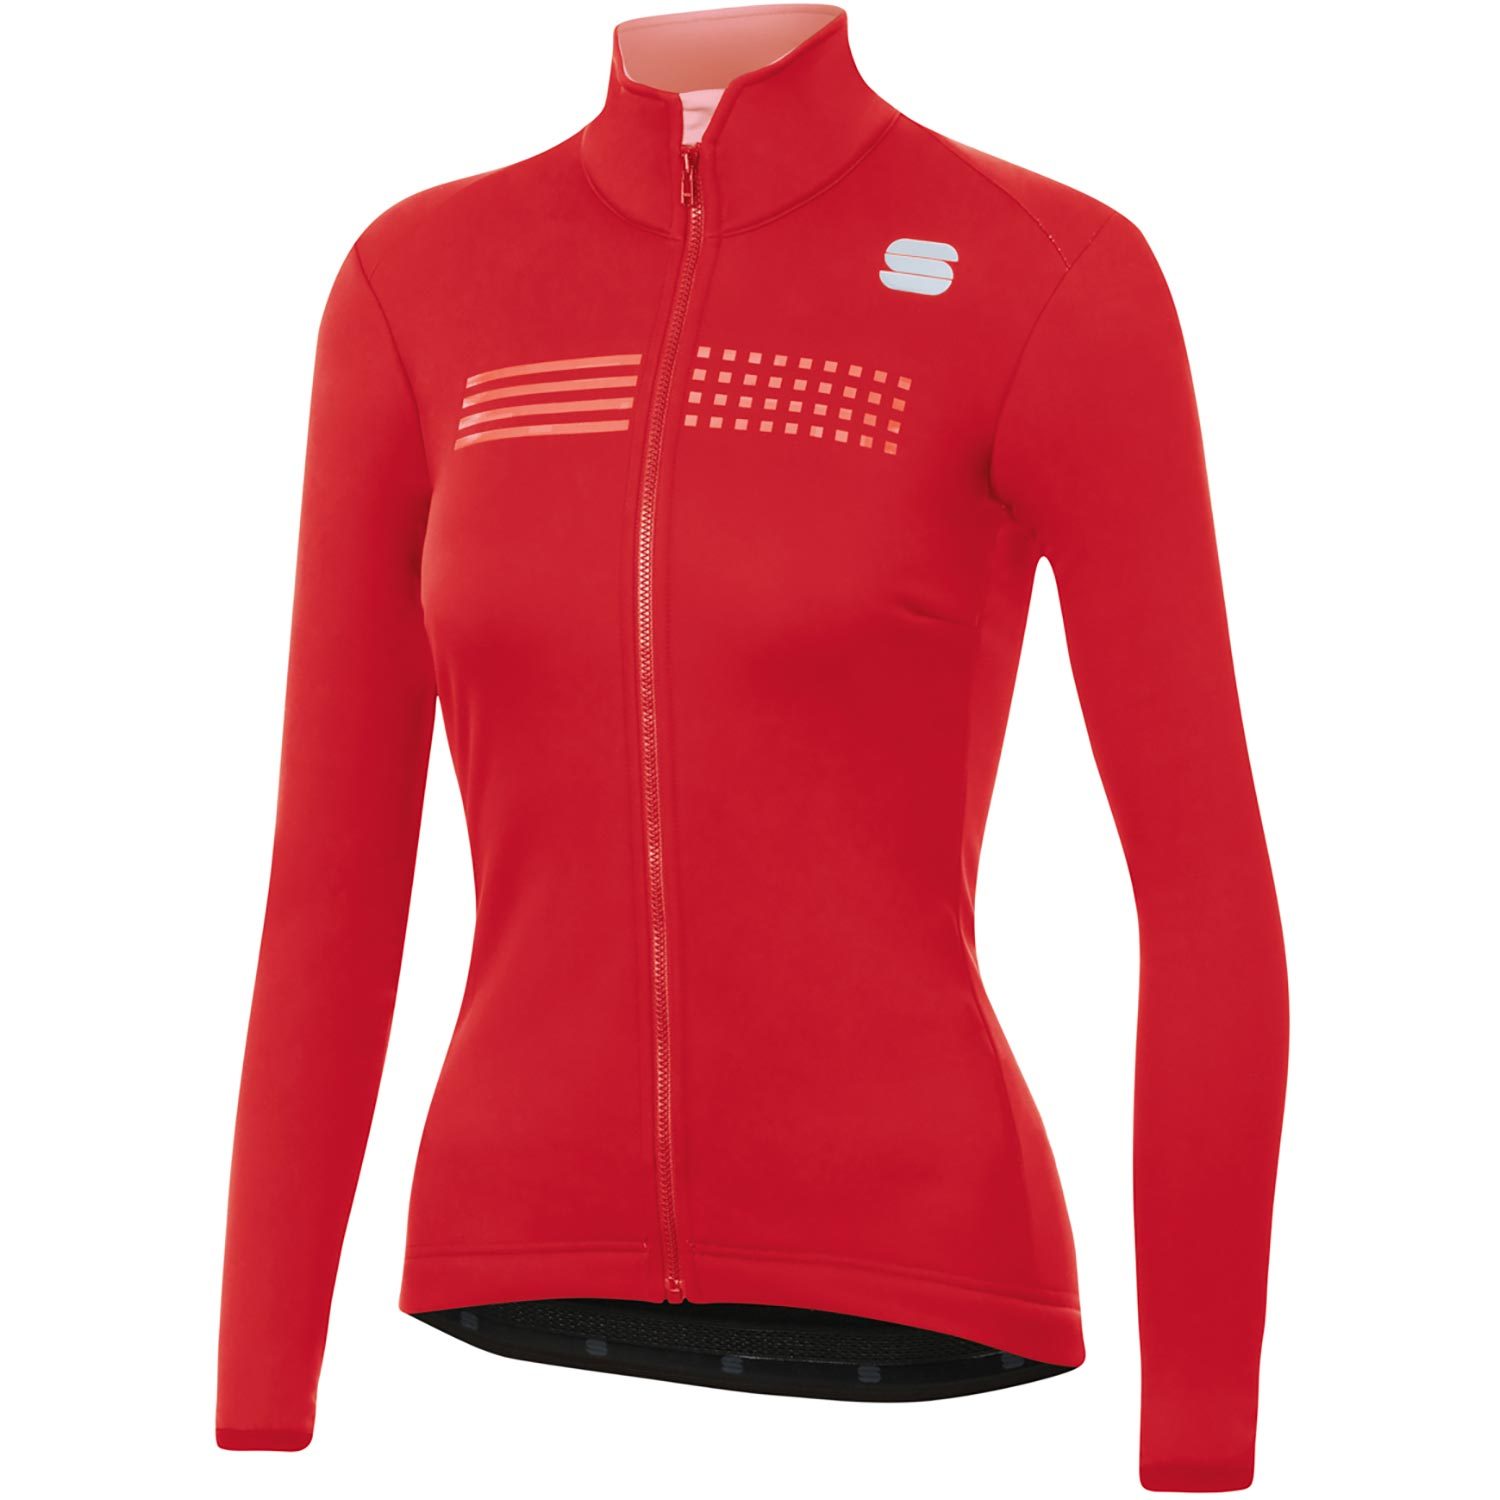 Sportful Tempo Women's Cycling Jacket | Merlin Cycles